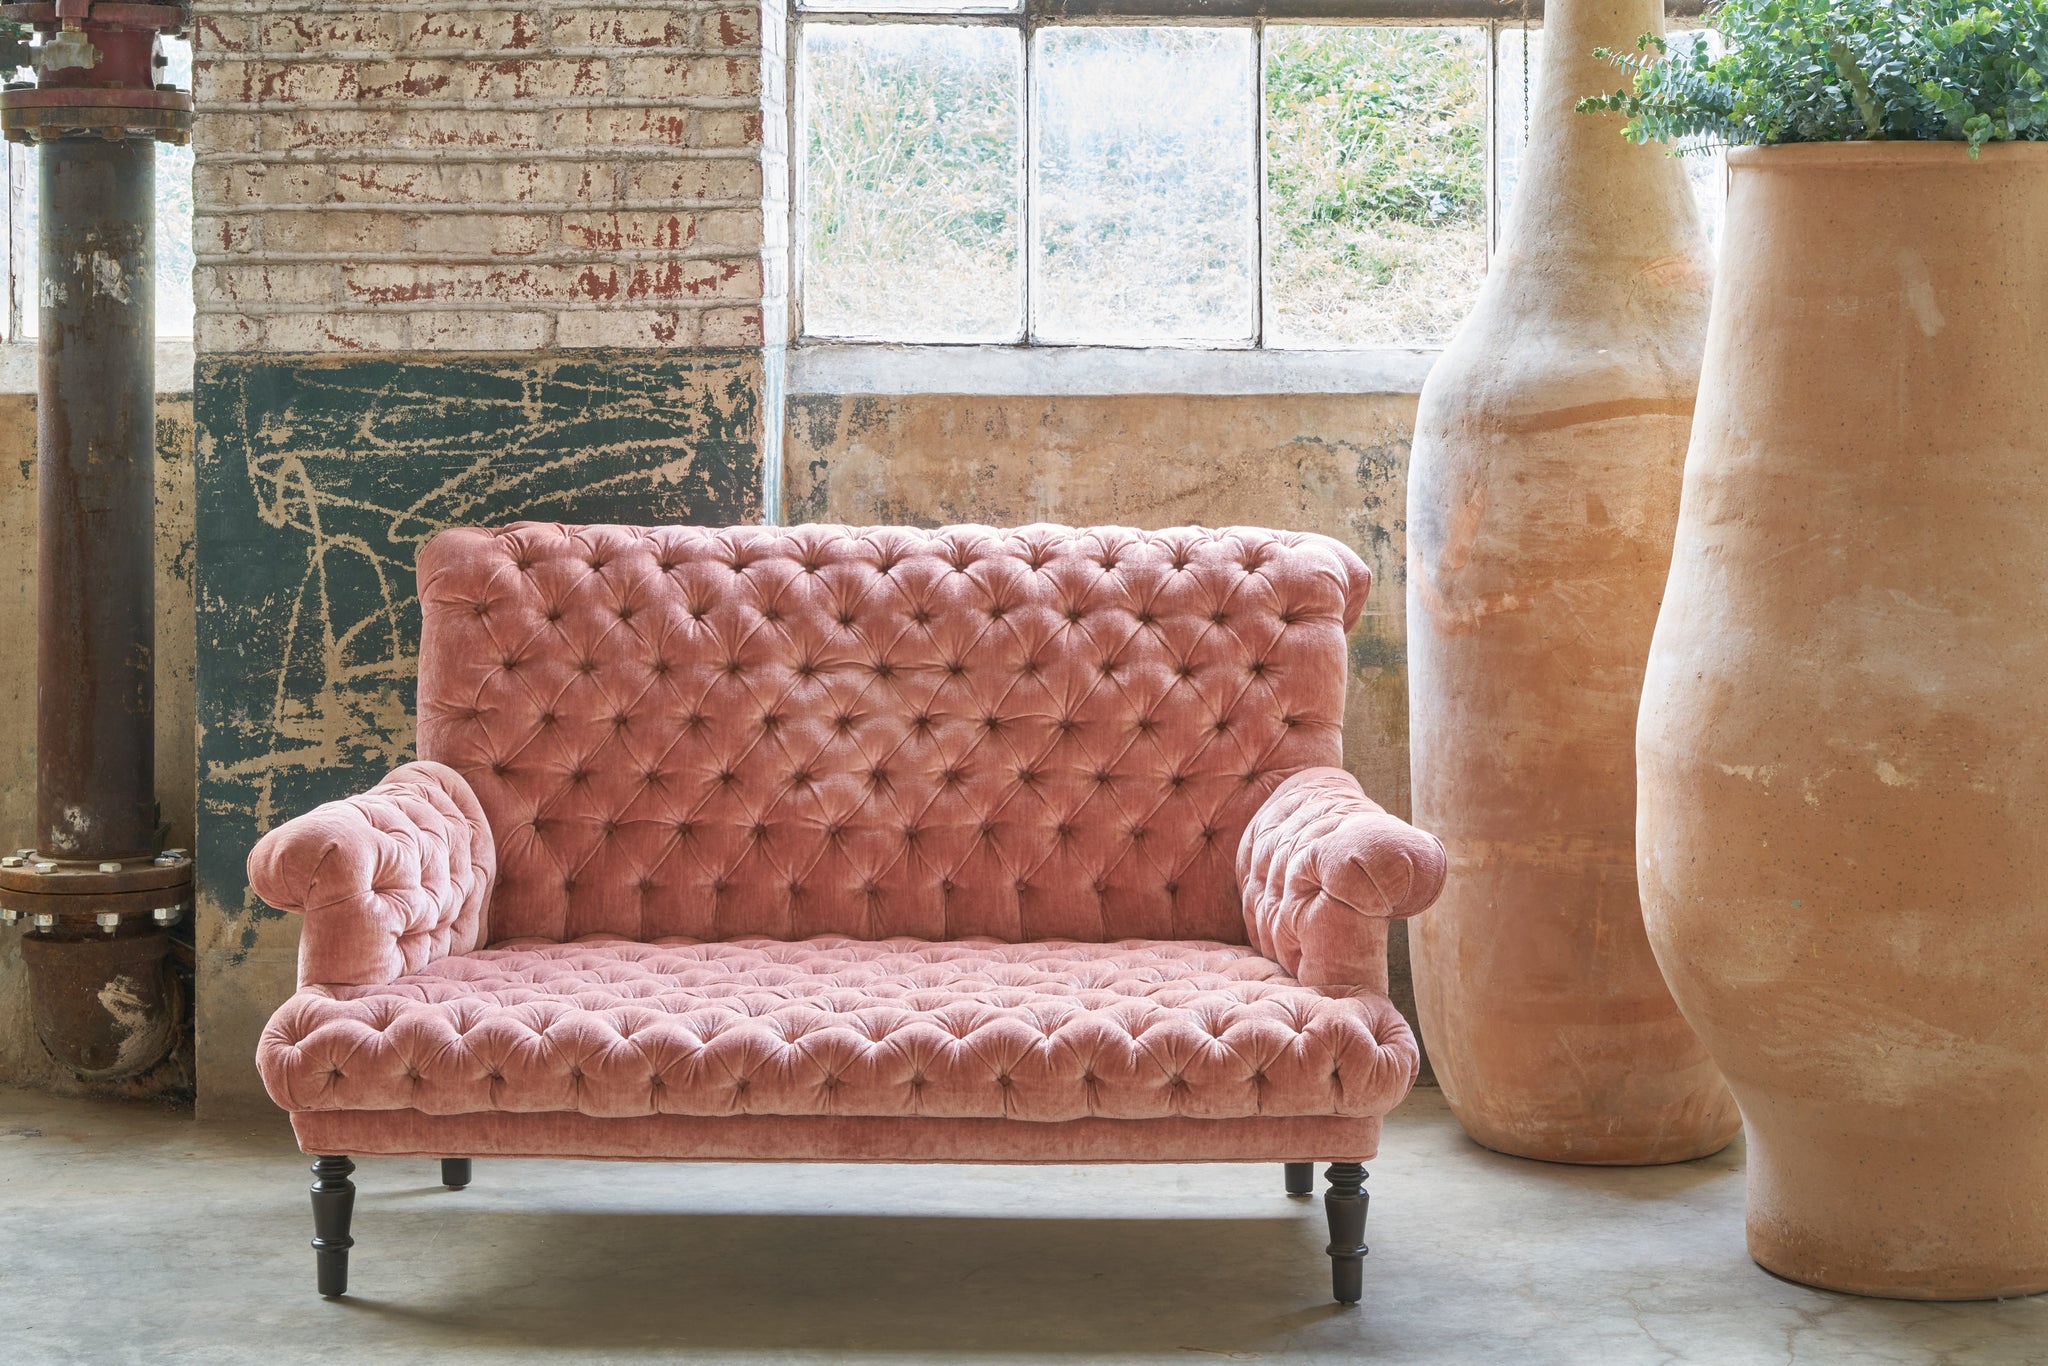  Pink velvet, tufted sofa next to 2 large terracotta pots. Photographed in Velluto Rose. 